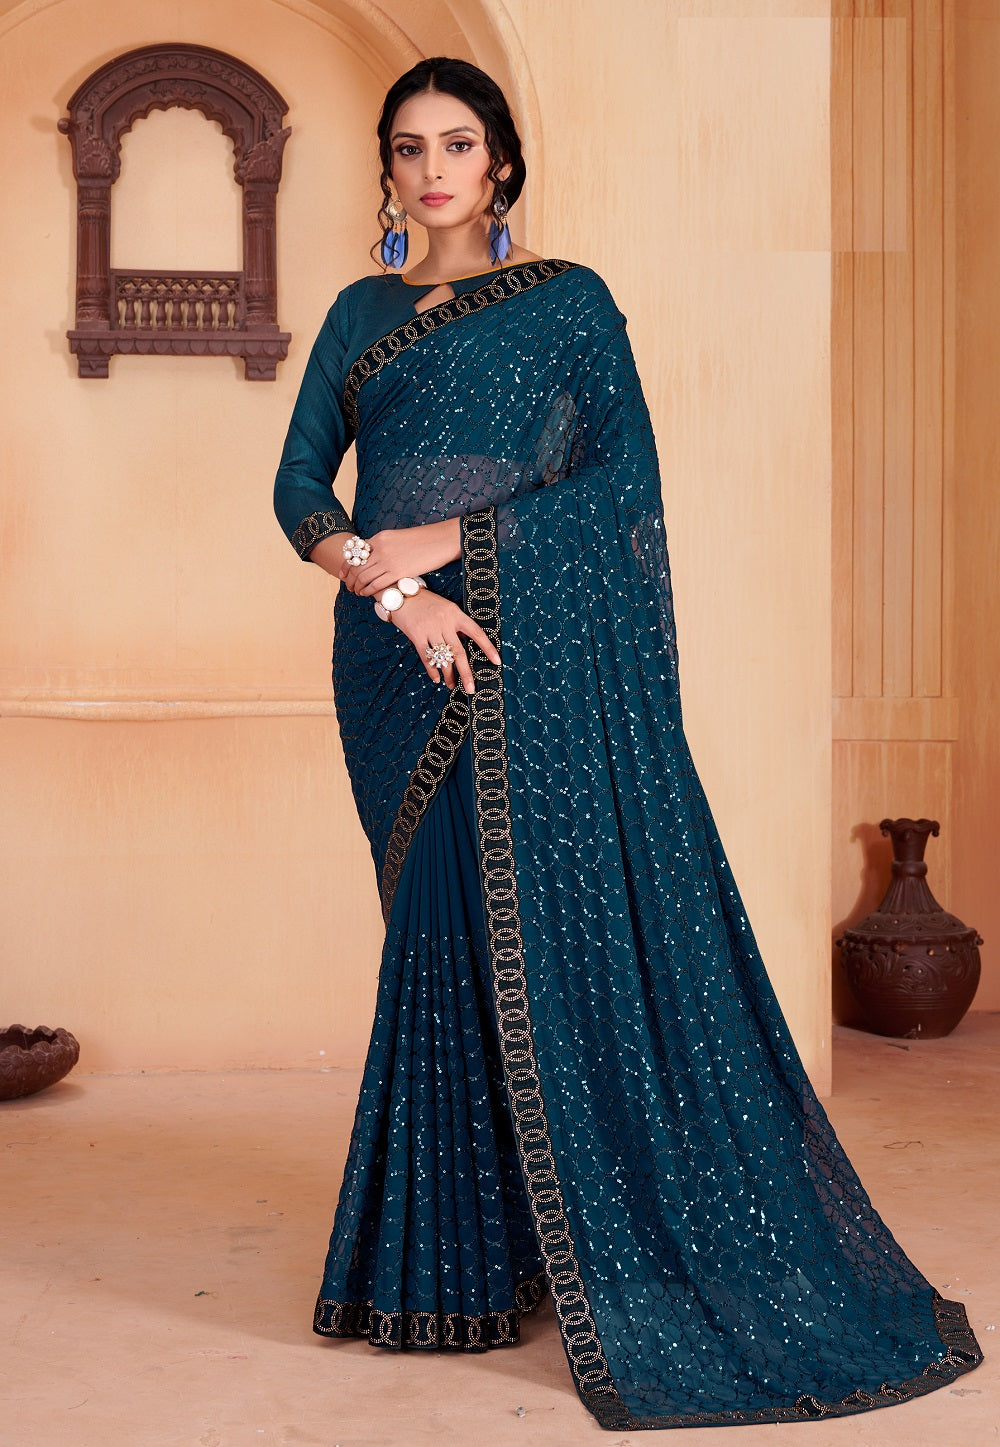 Georgette Sequined Saree in Teal Blue